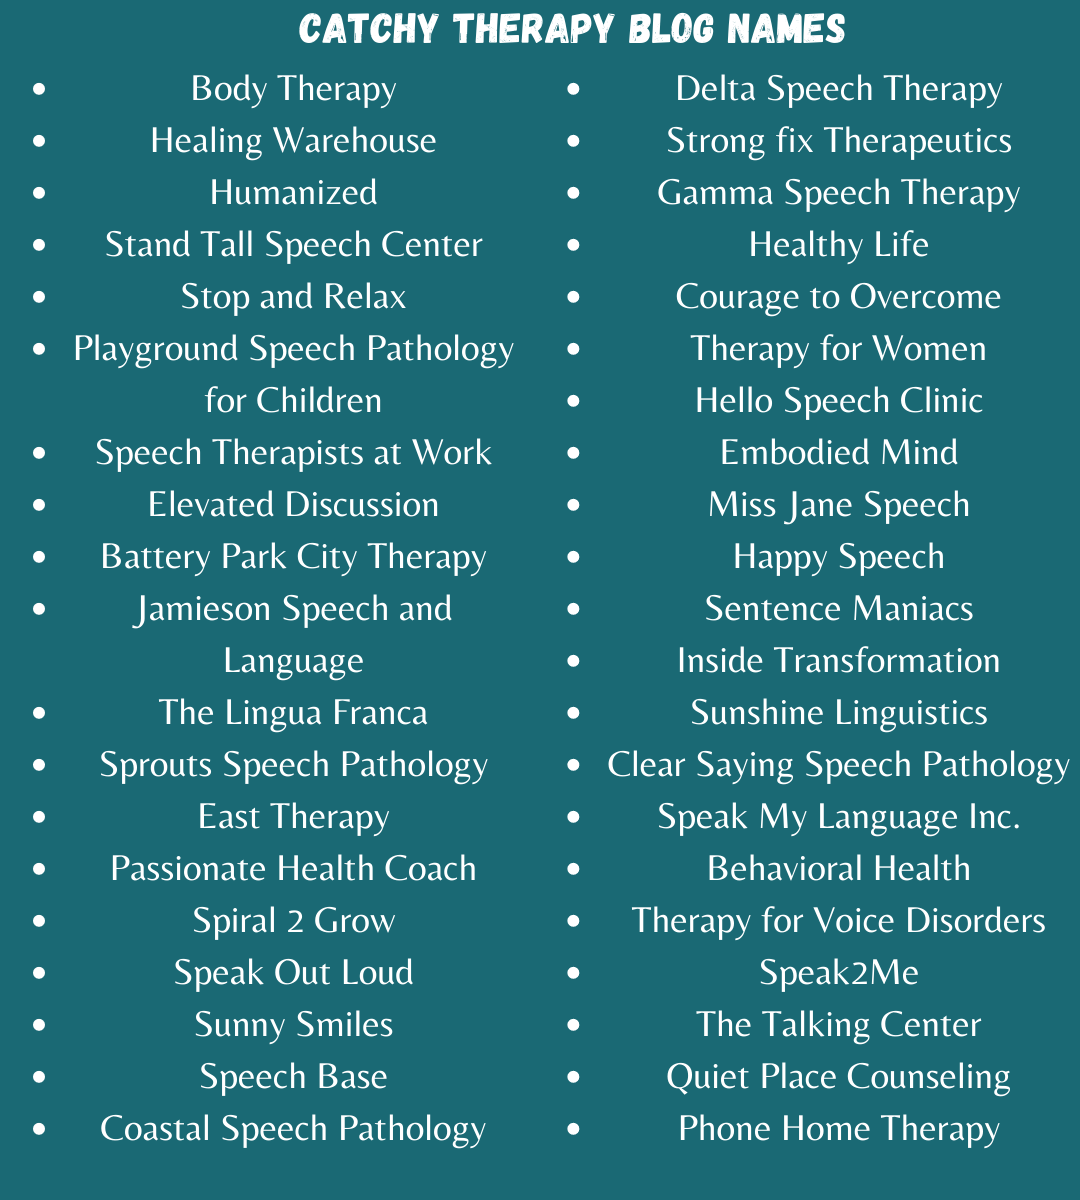 Catchy Therapy Blog Names